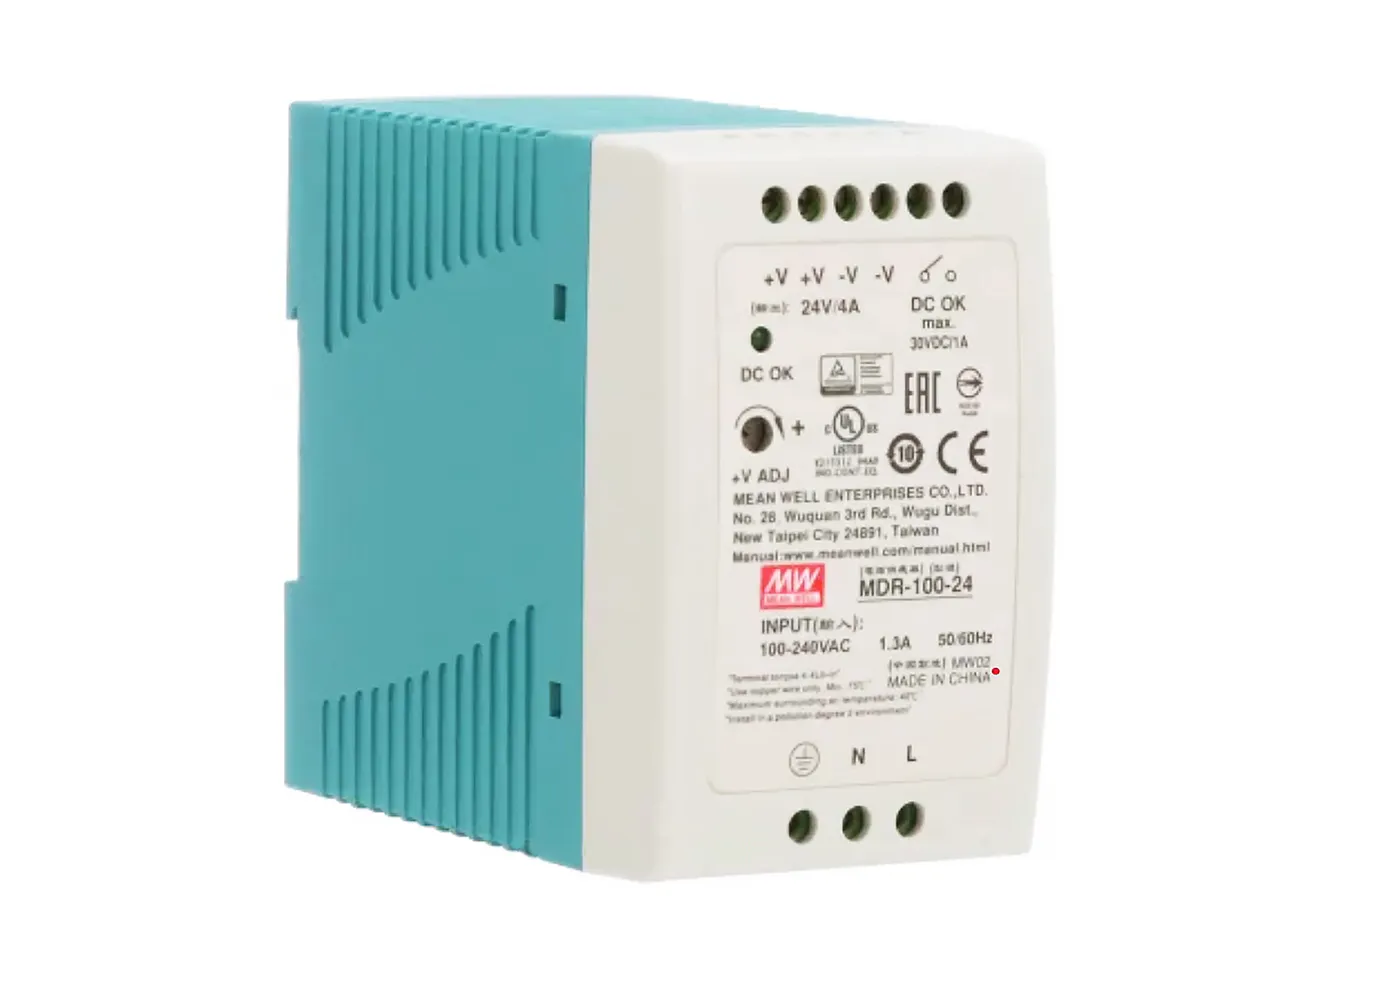 Power Supply, Single Output, DIN Rail, 24VDC, 4A<br/>

<span class="clsSpnProdMdls">For all products, except PC400's</span>